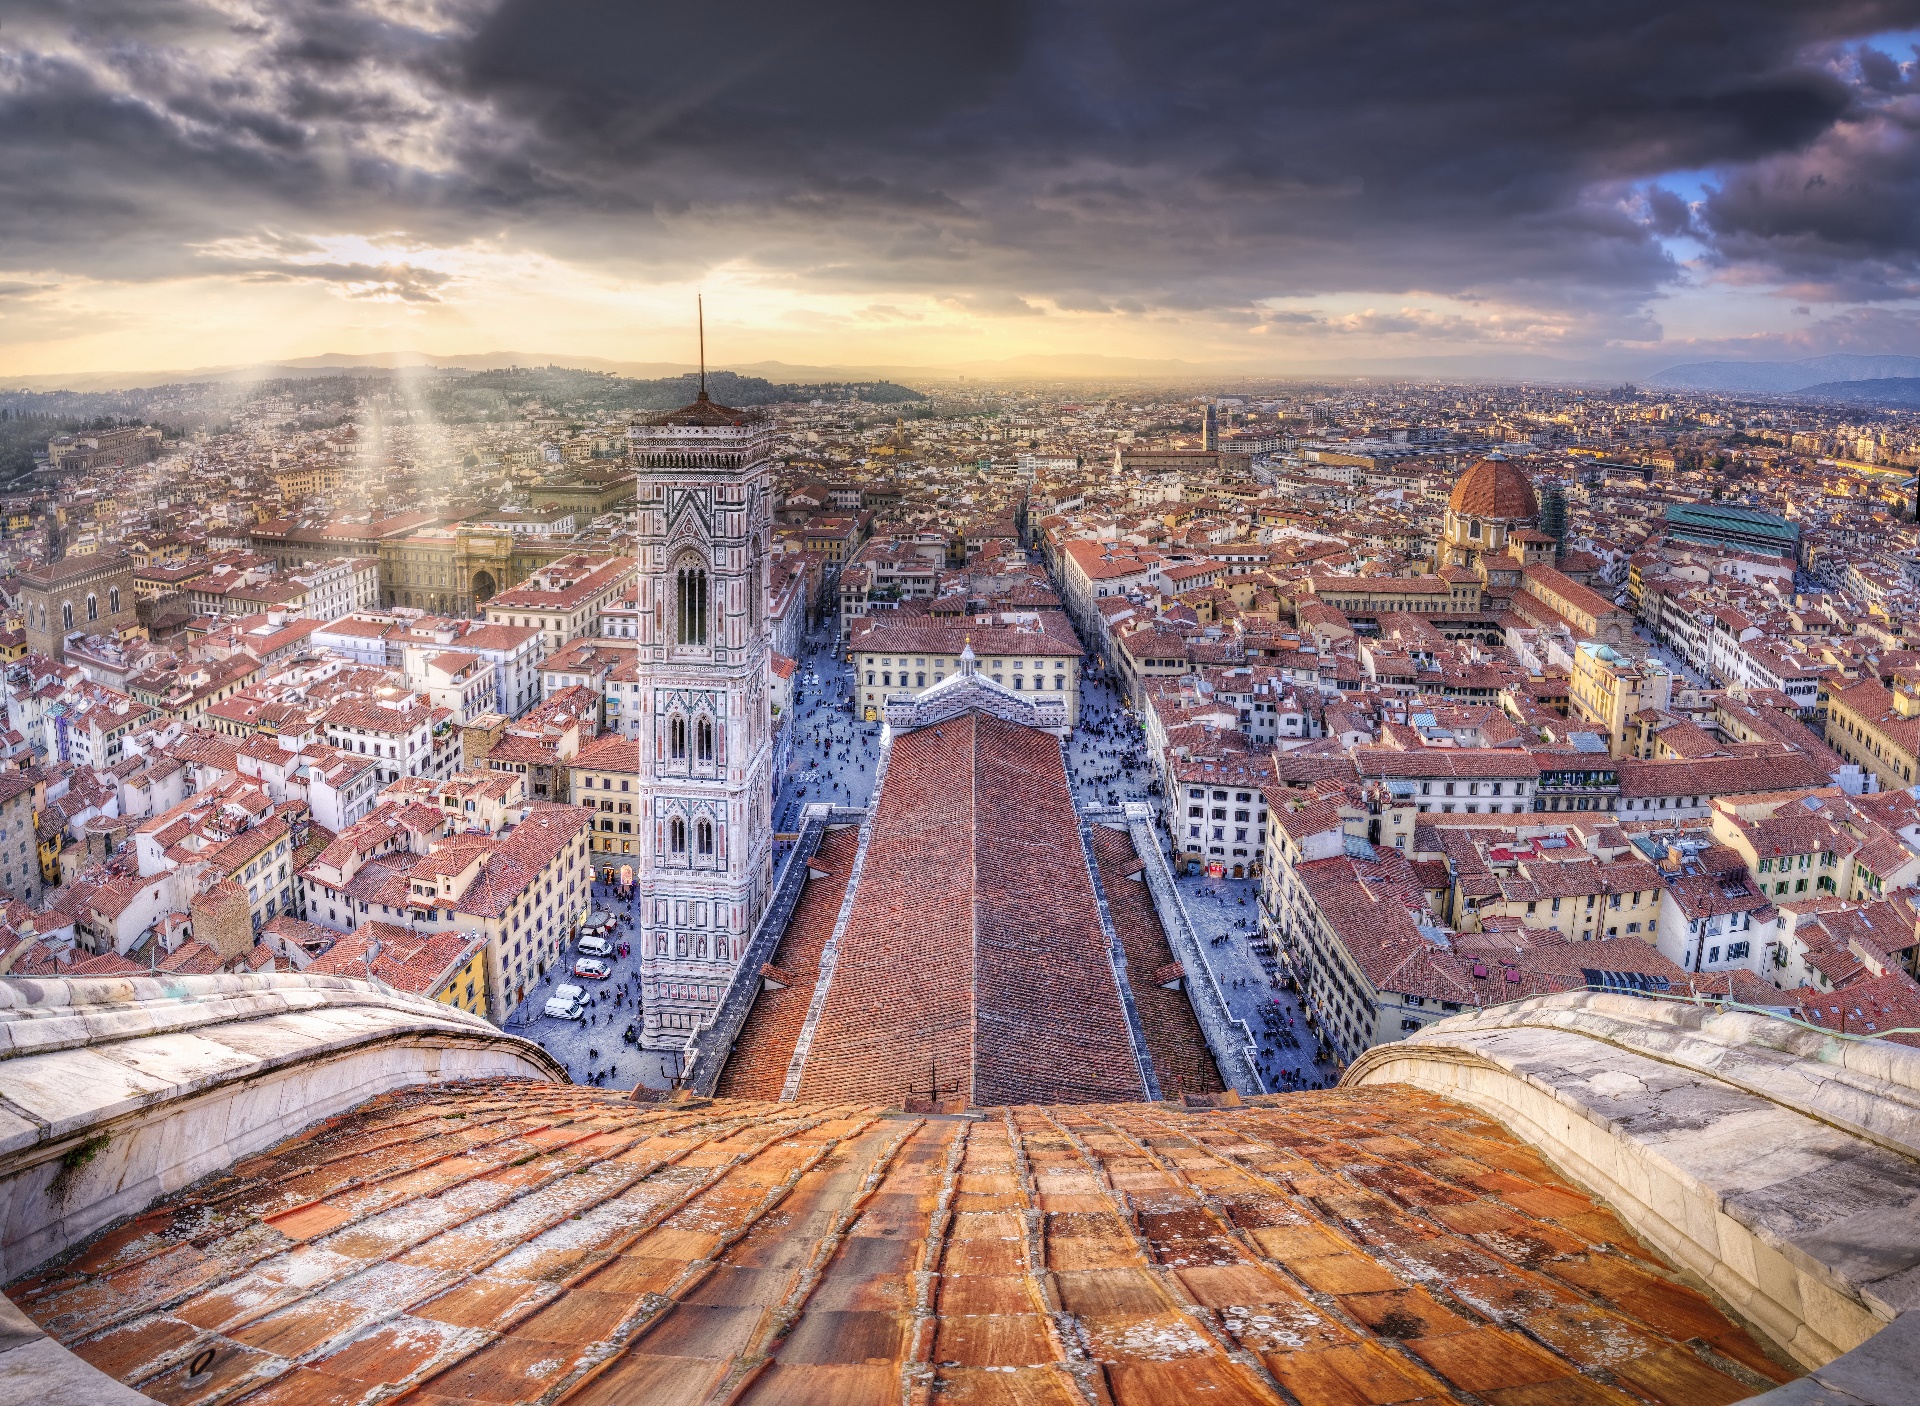 General 1920x1406 Italy city cityscape tower Florence rooftops cathedral clouds